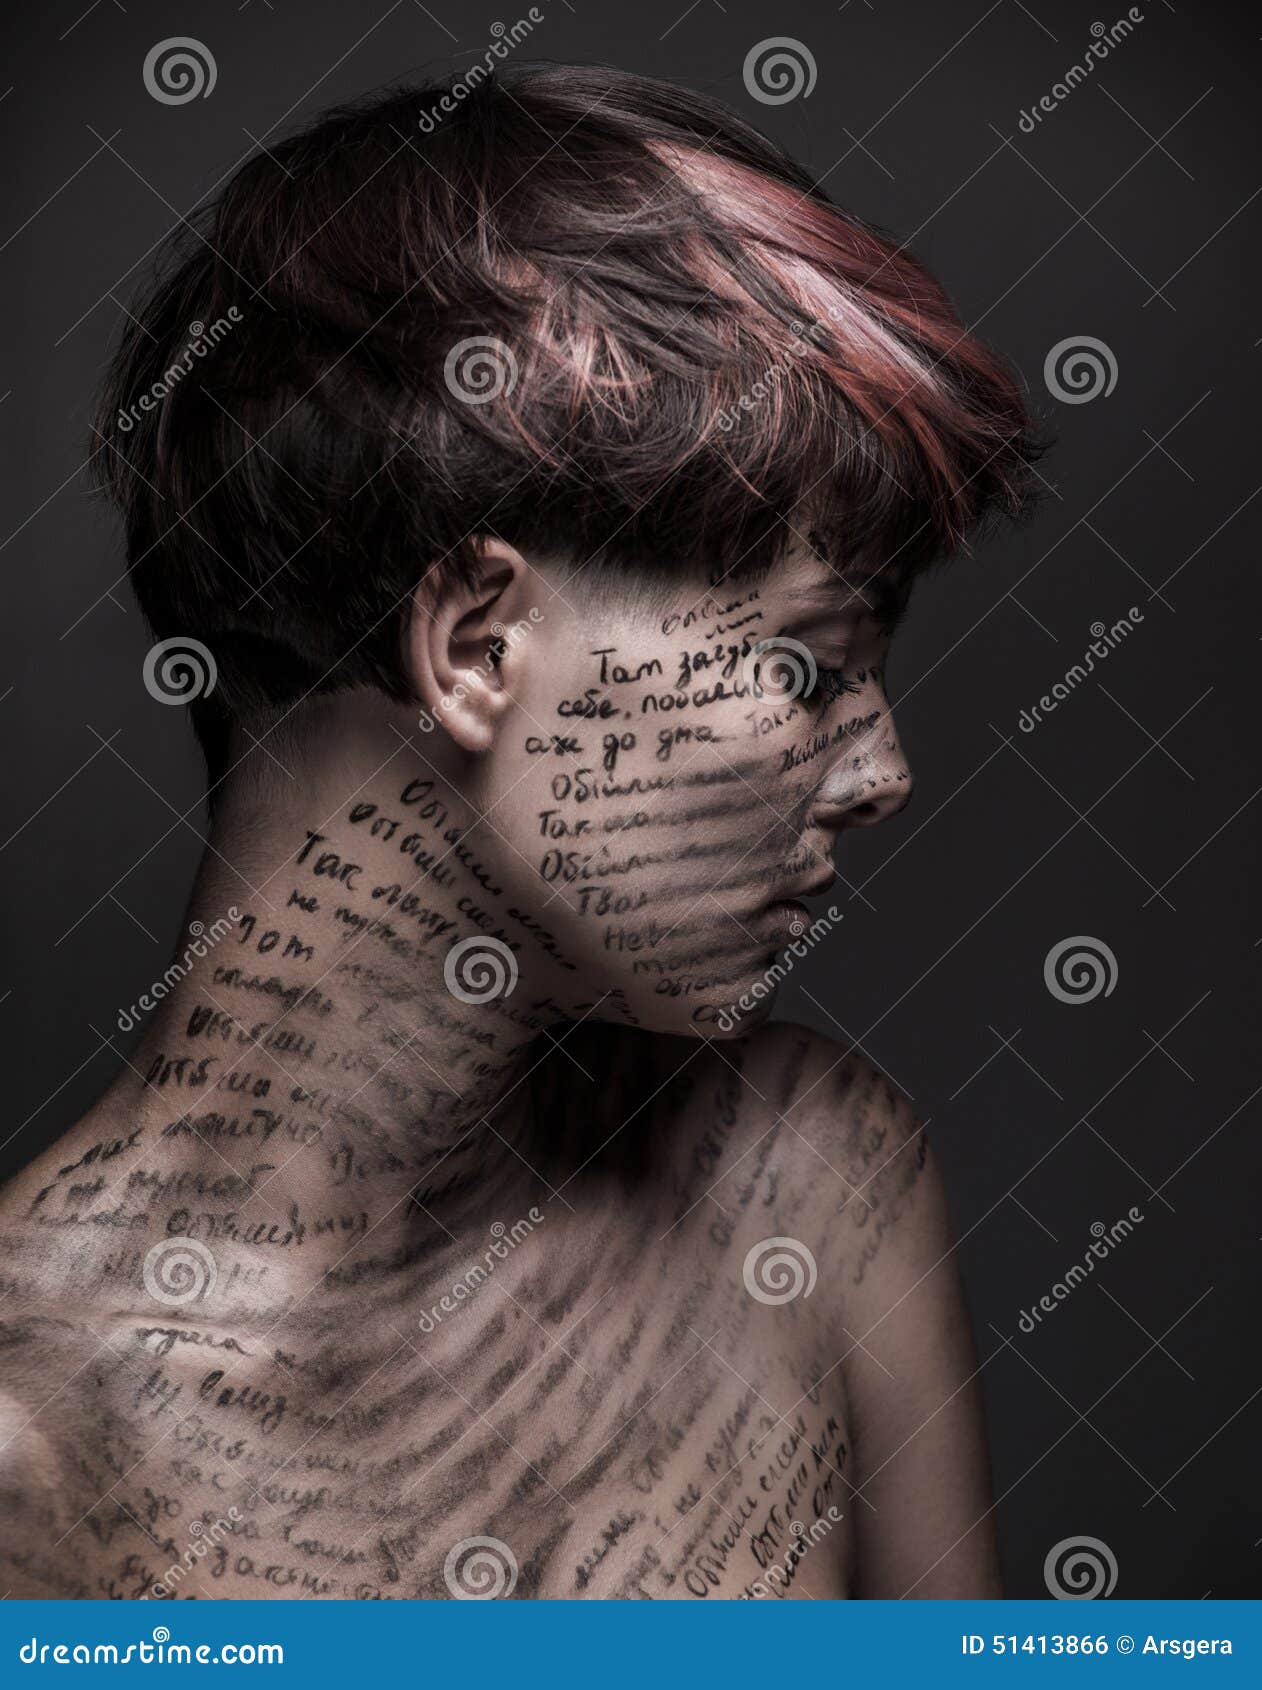 Sad Girl With Writing And Erased Text On Her Body Stock